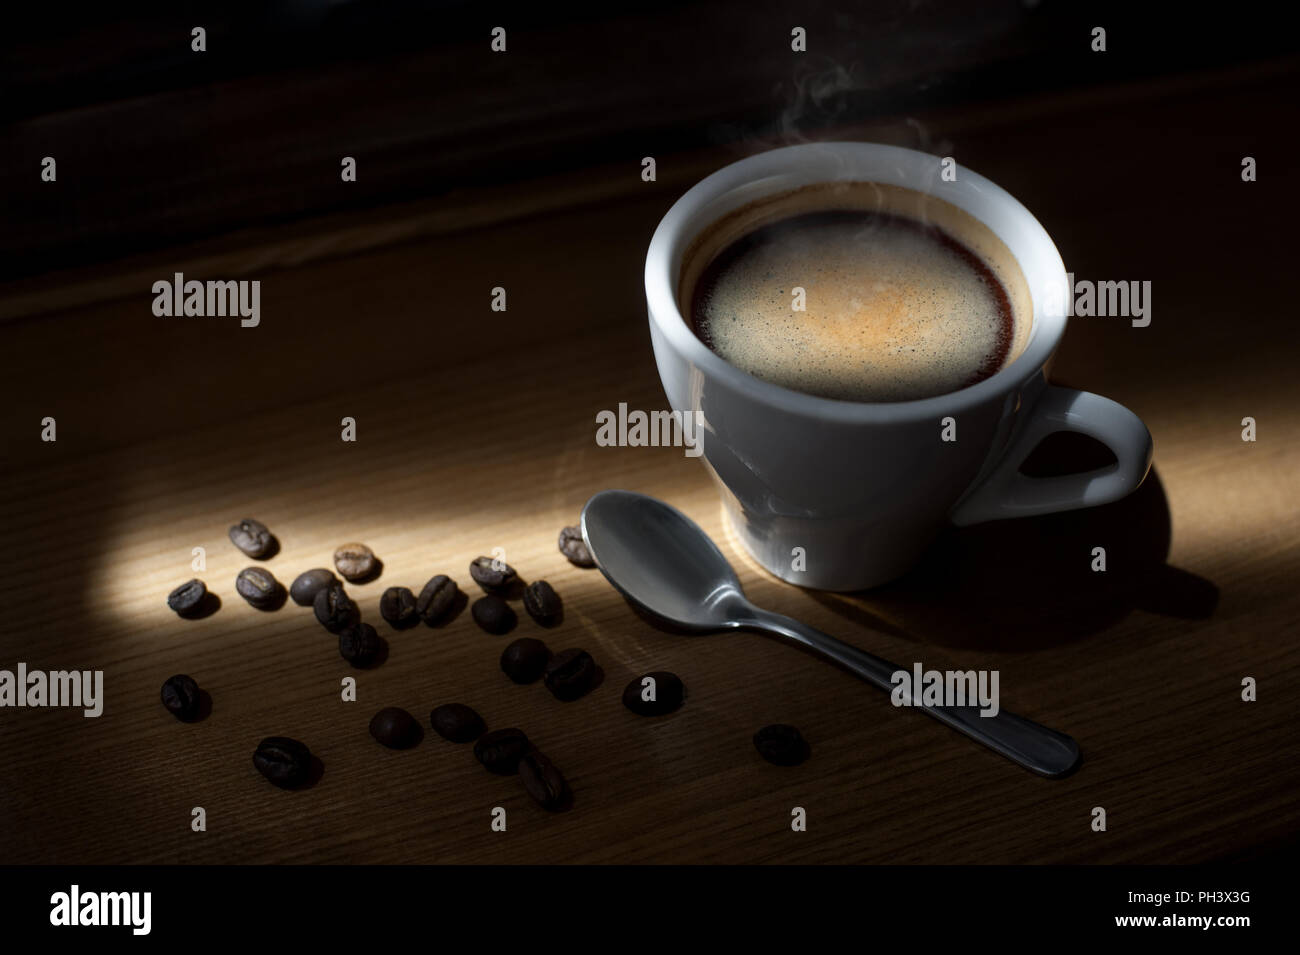 https://c8.alamy.com/comp/PH3X3G/hot-coffee-cappuccino-cup-with-milk-foam-on-wood-table-background-PH3X3G.jpg